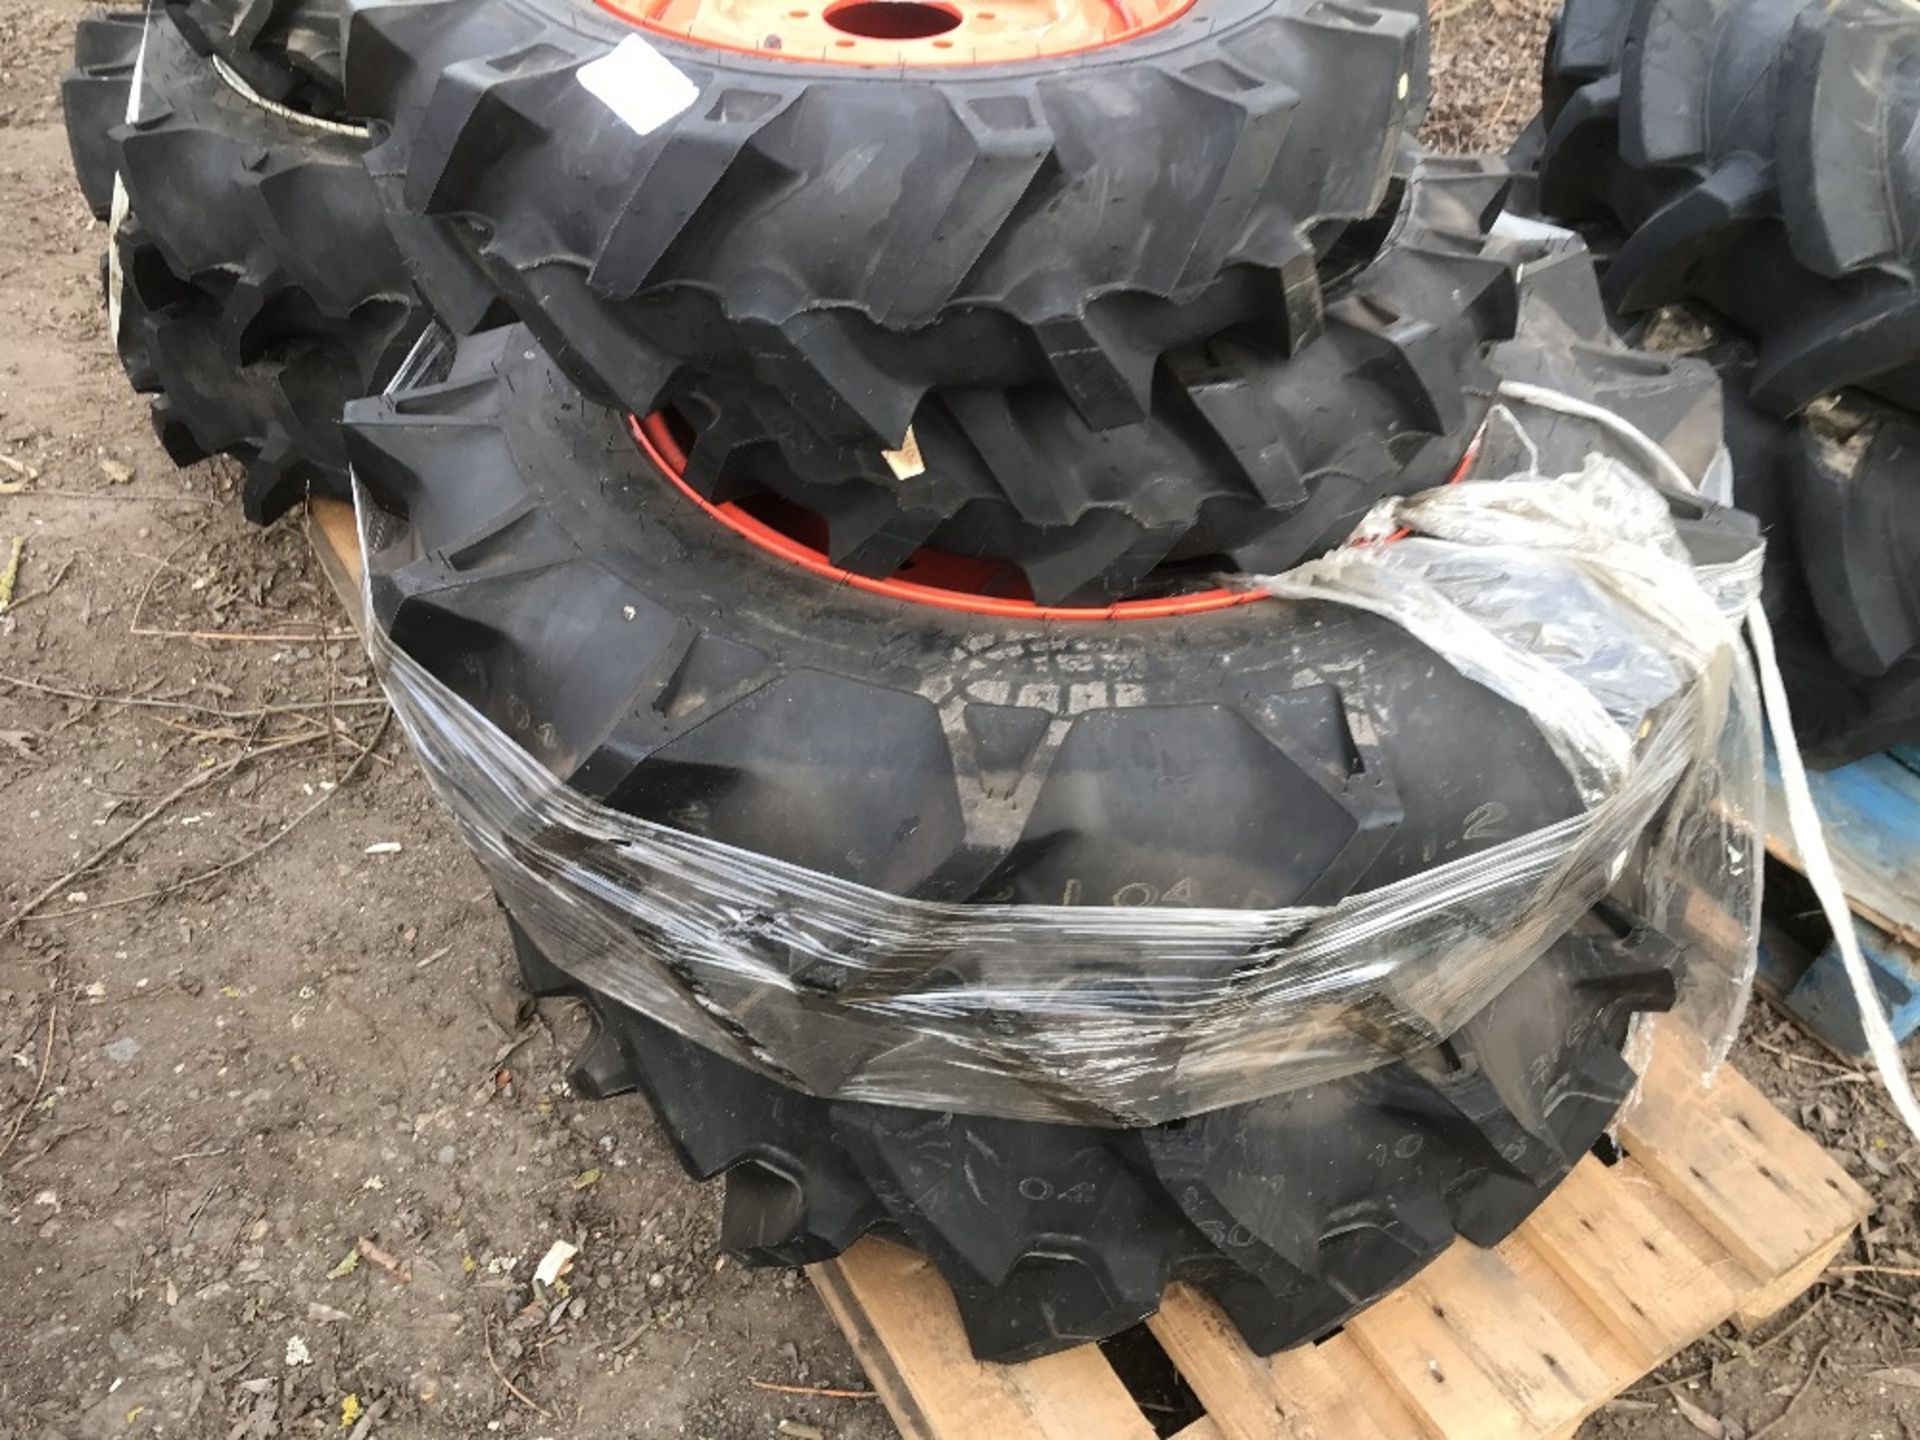 SET OF 4 X COMPACT TRACTOR WHEELS AND TYRES 2 X 7-14 PLUS 2 X 11.2-24